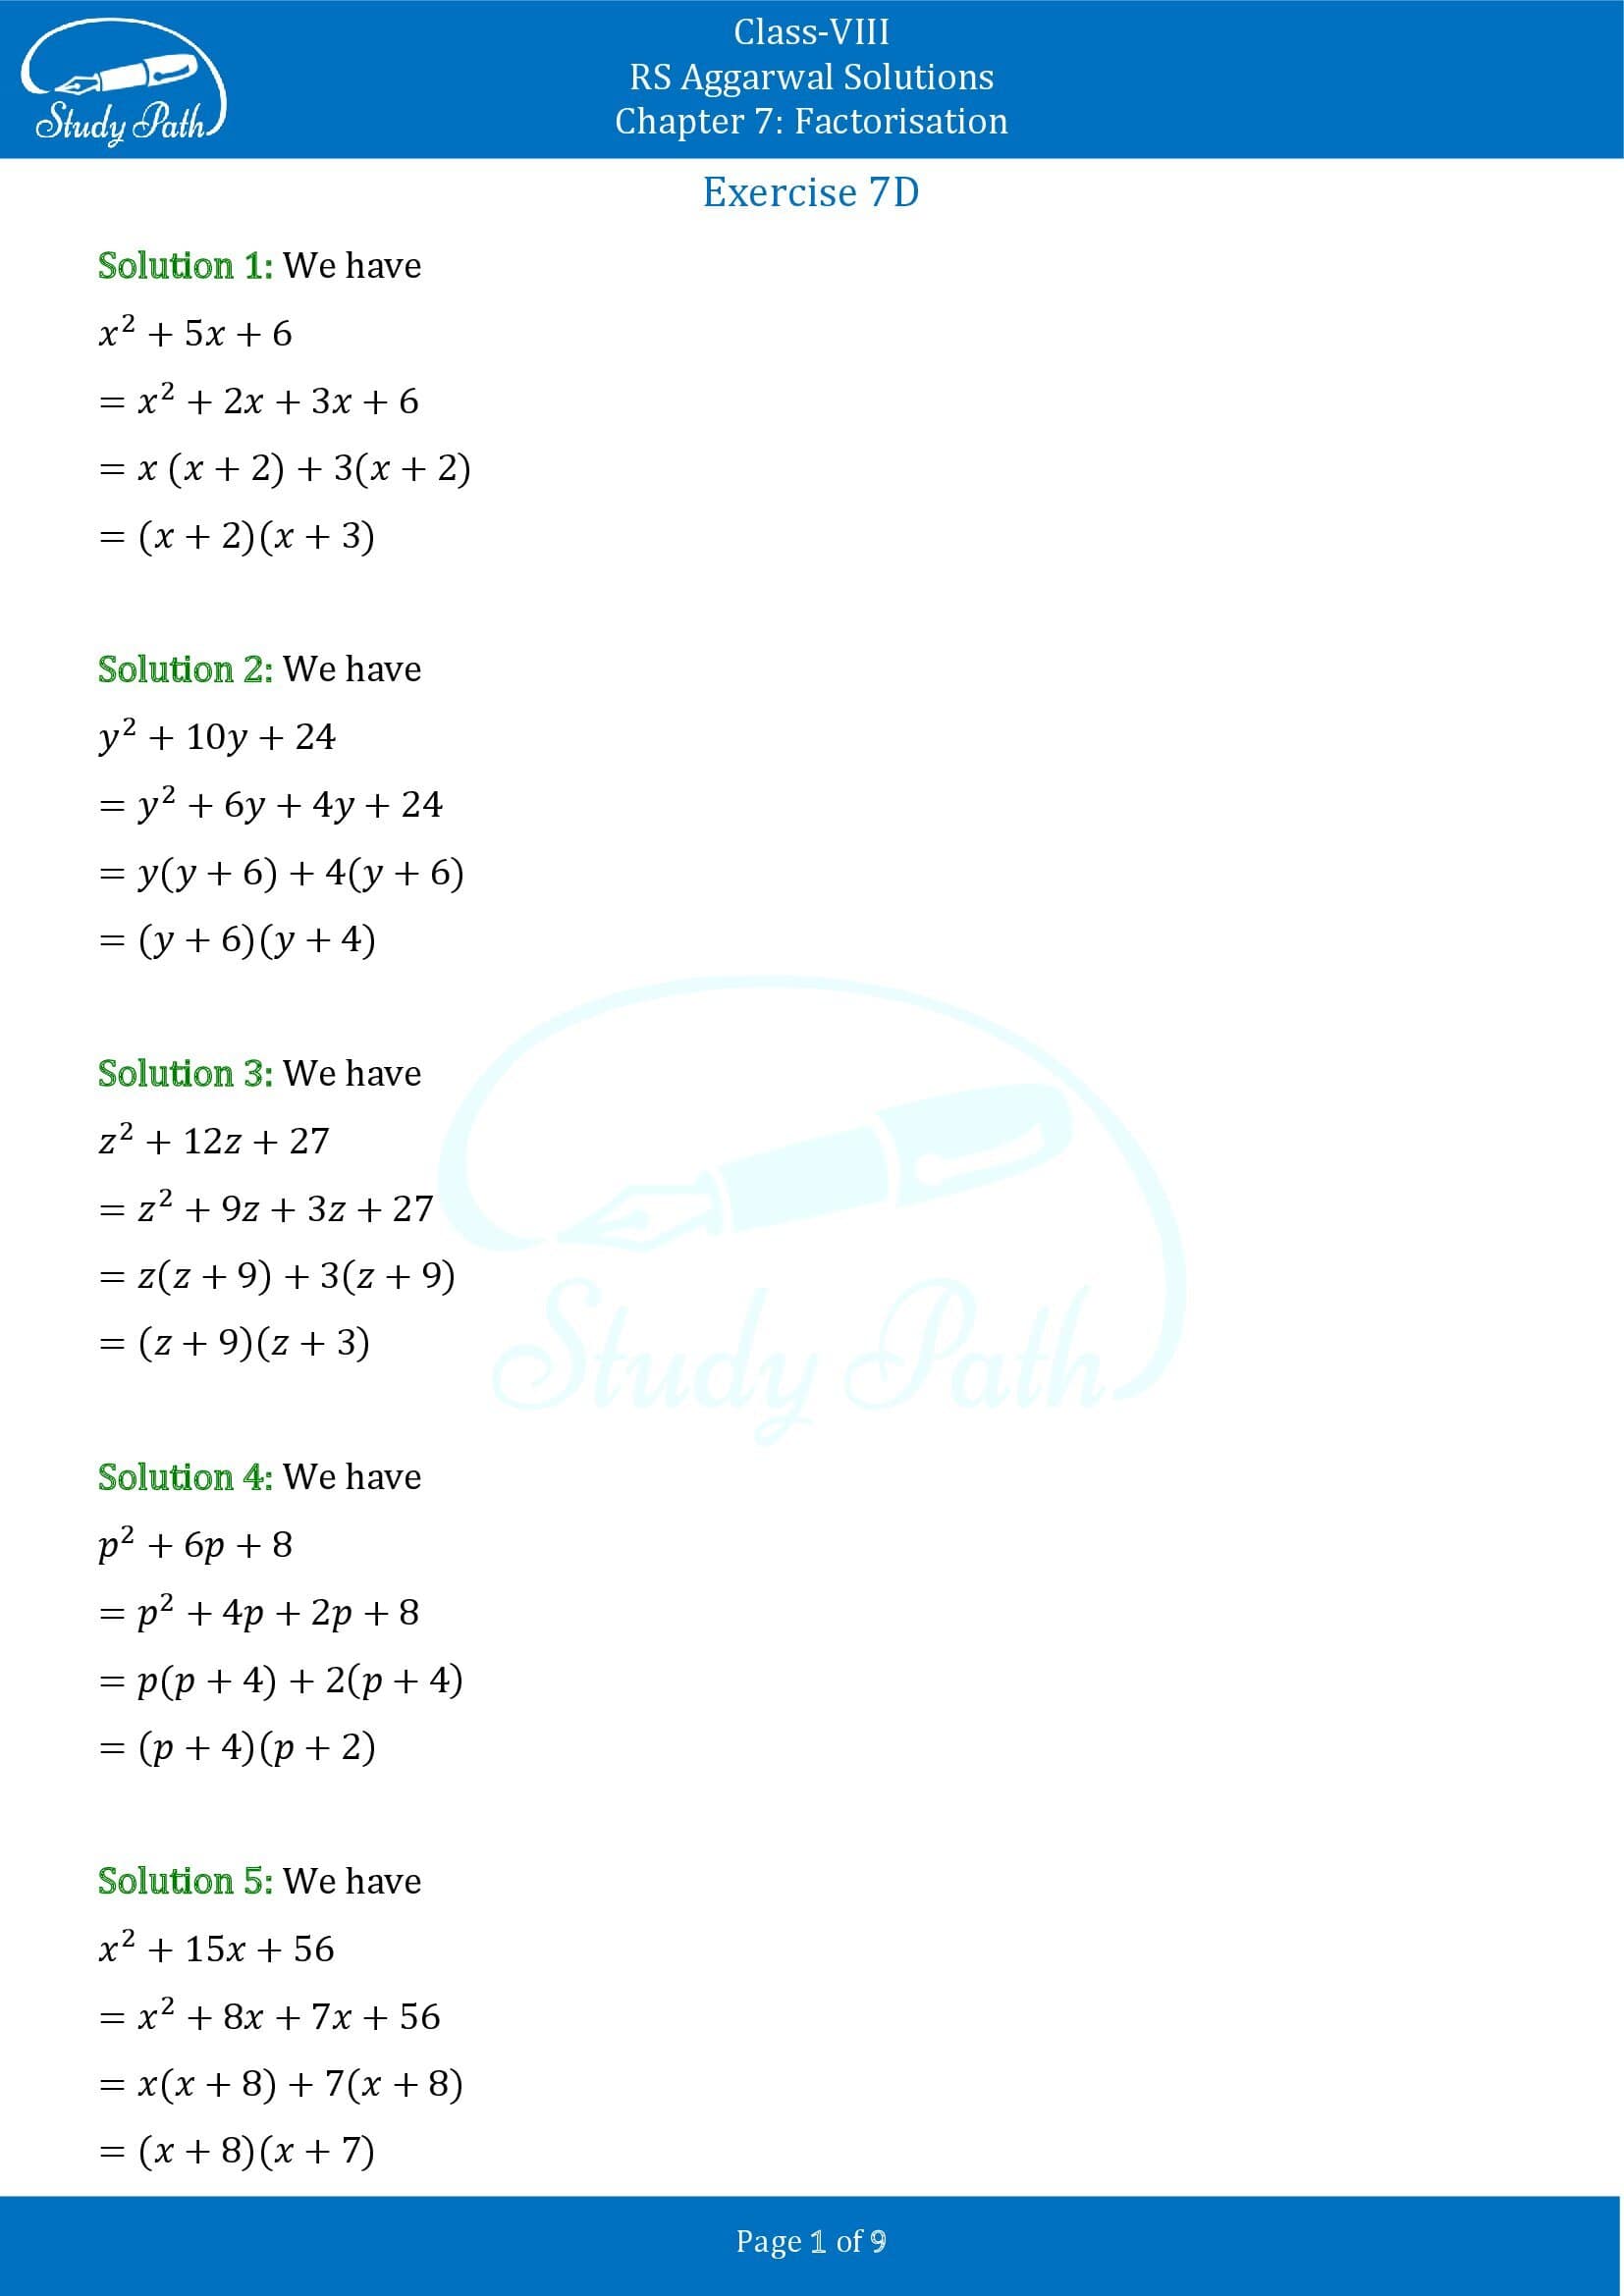 RS Aggarwal Solutions Class 8 Chapter 7 Factorisation Exercise 7D 001